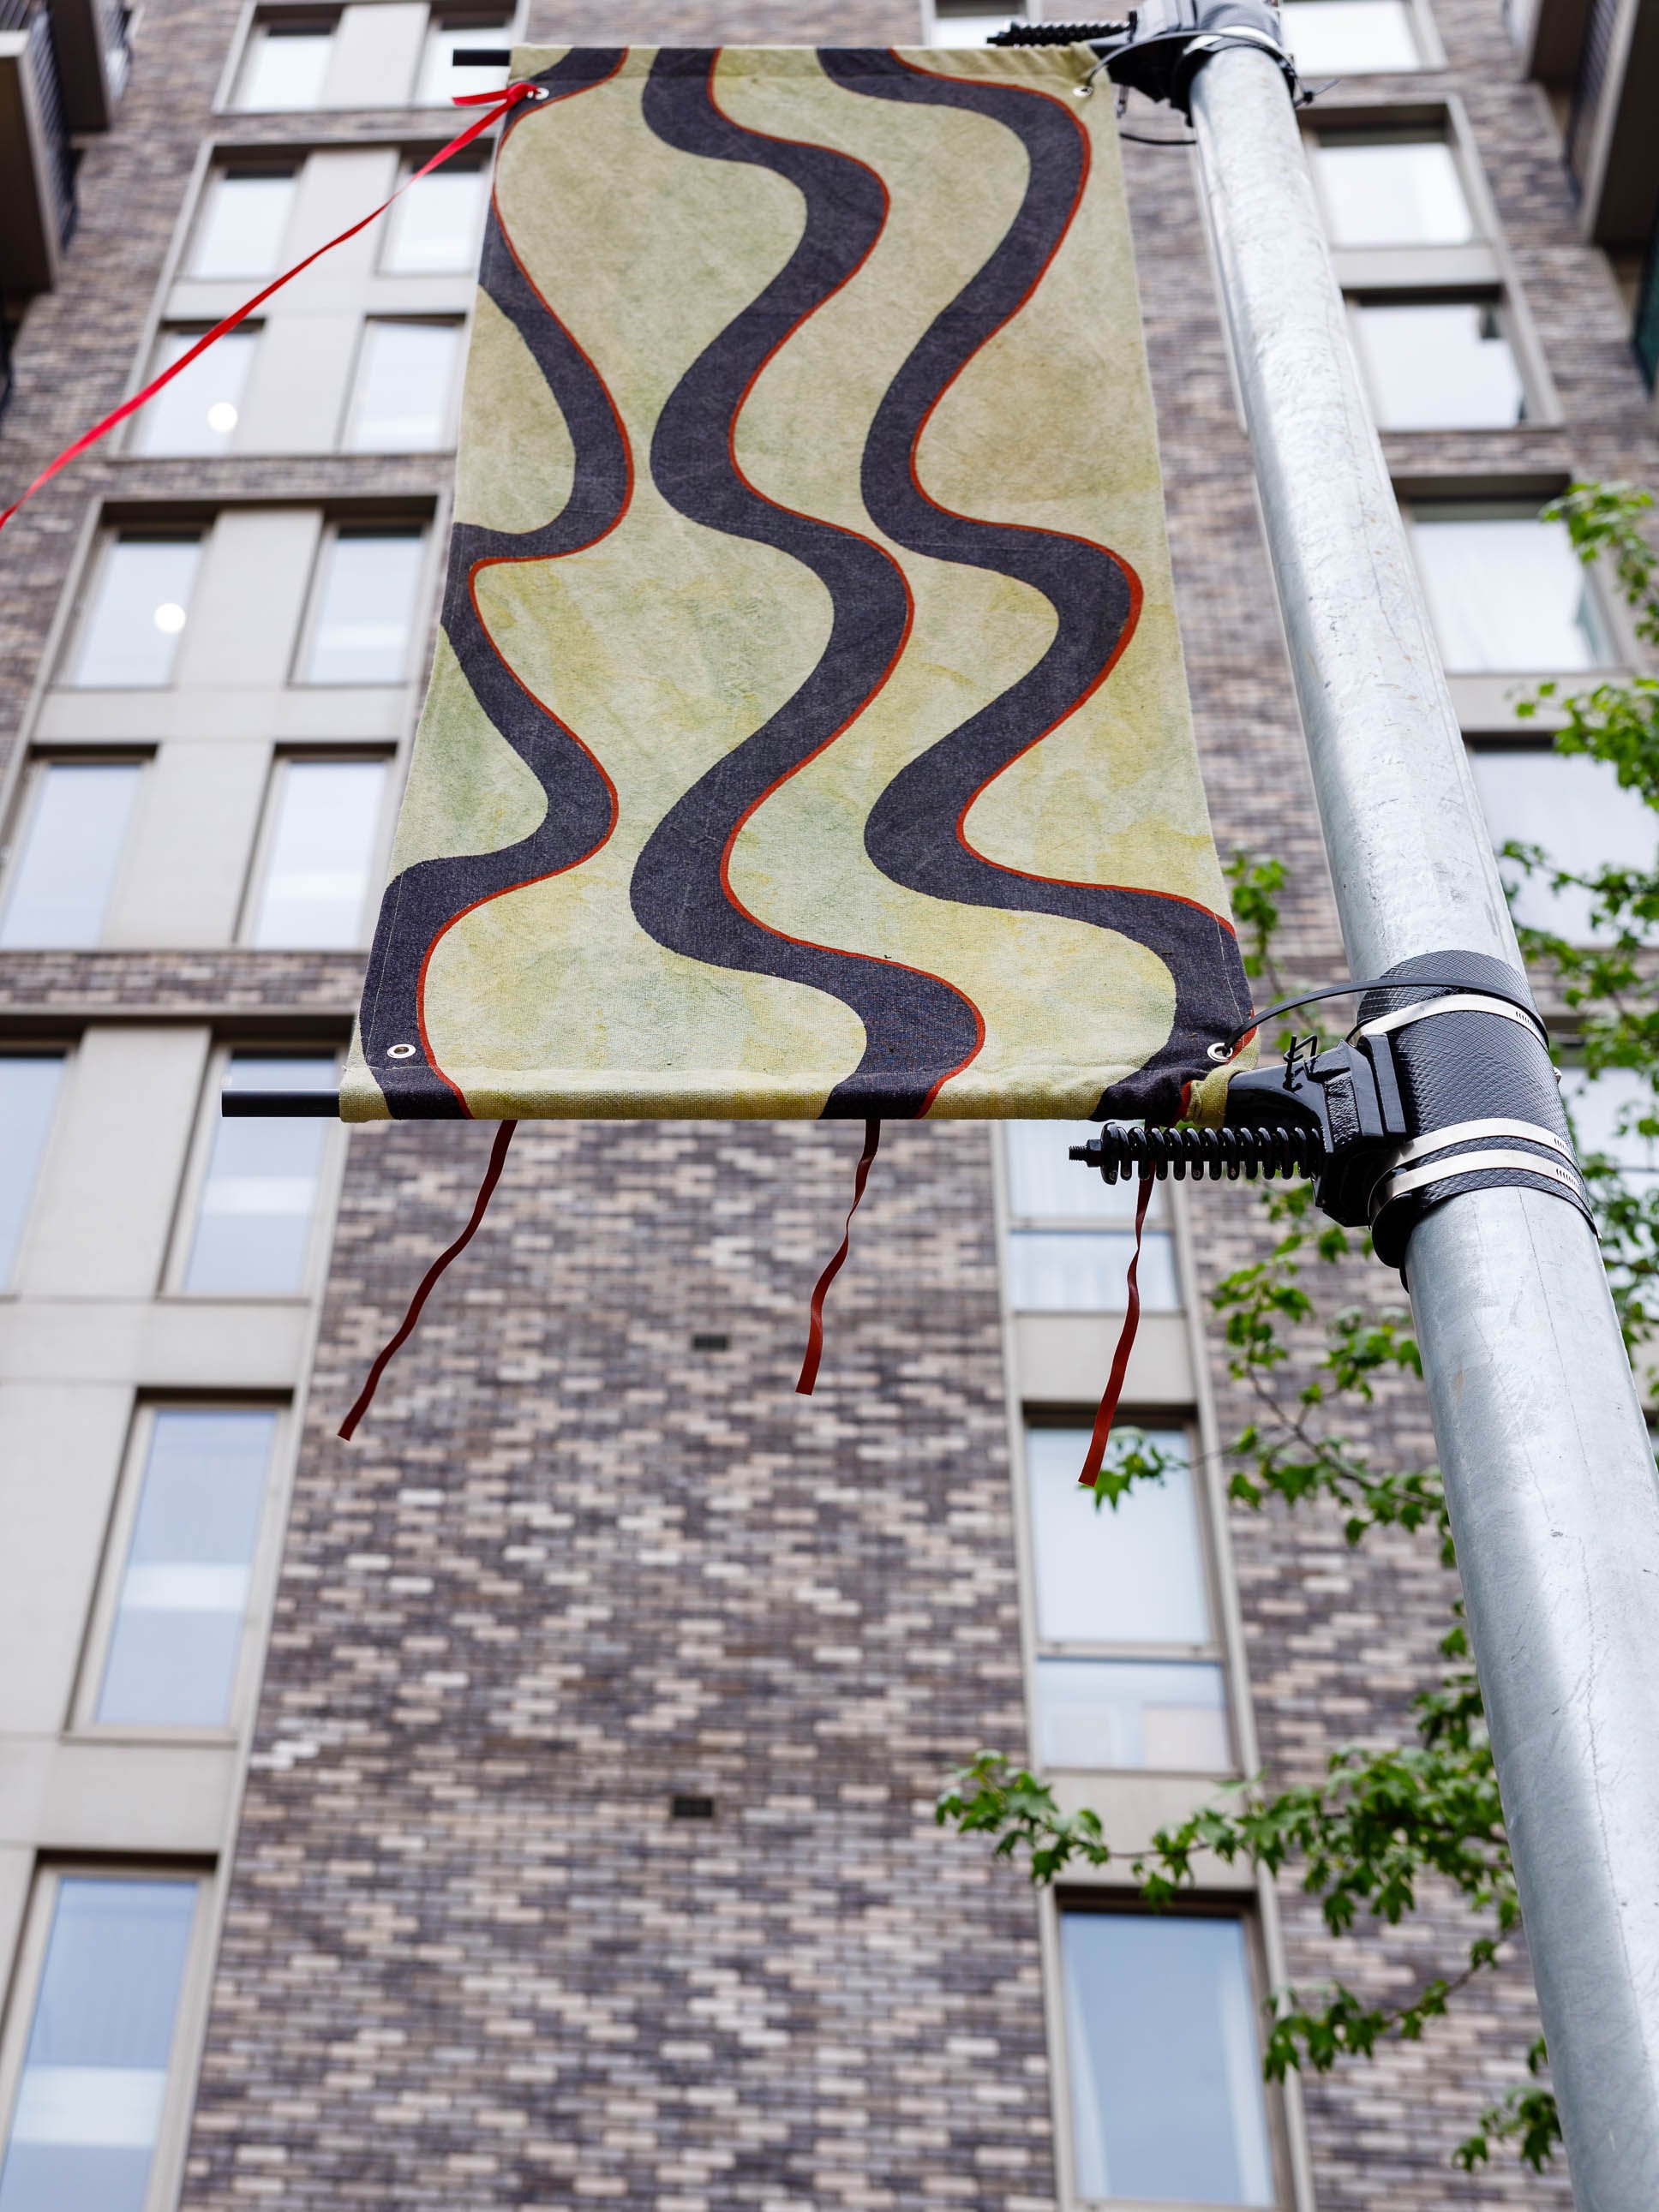 Desire Paths Banner, hemp cloth dyed with red onion skins, oak gall and ferrous sulphate. Ribbons hand-painted with pigment and beeswax. 